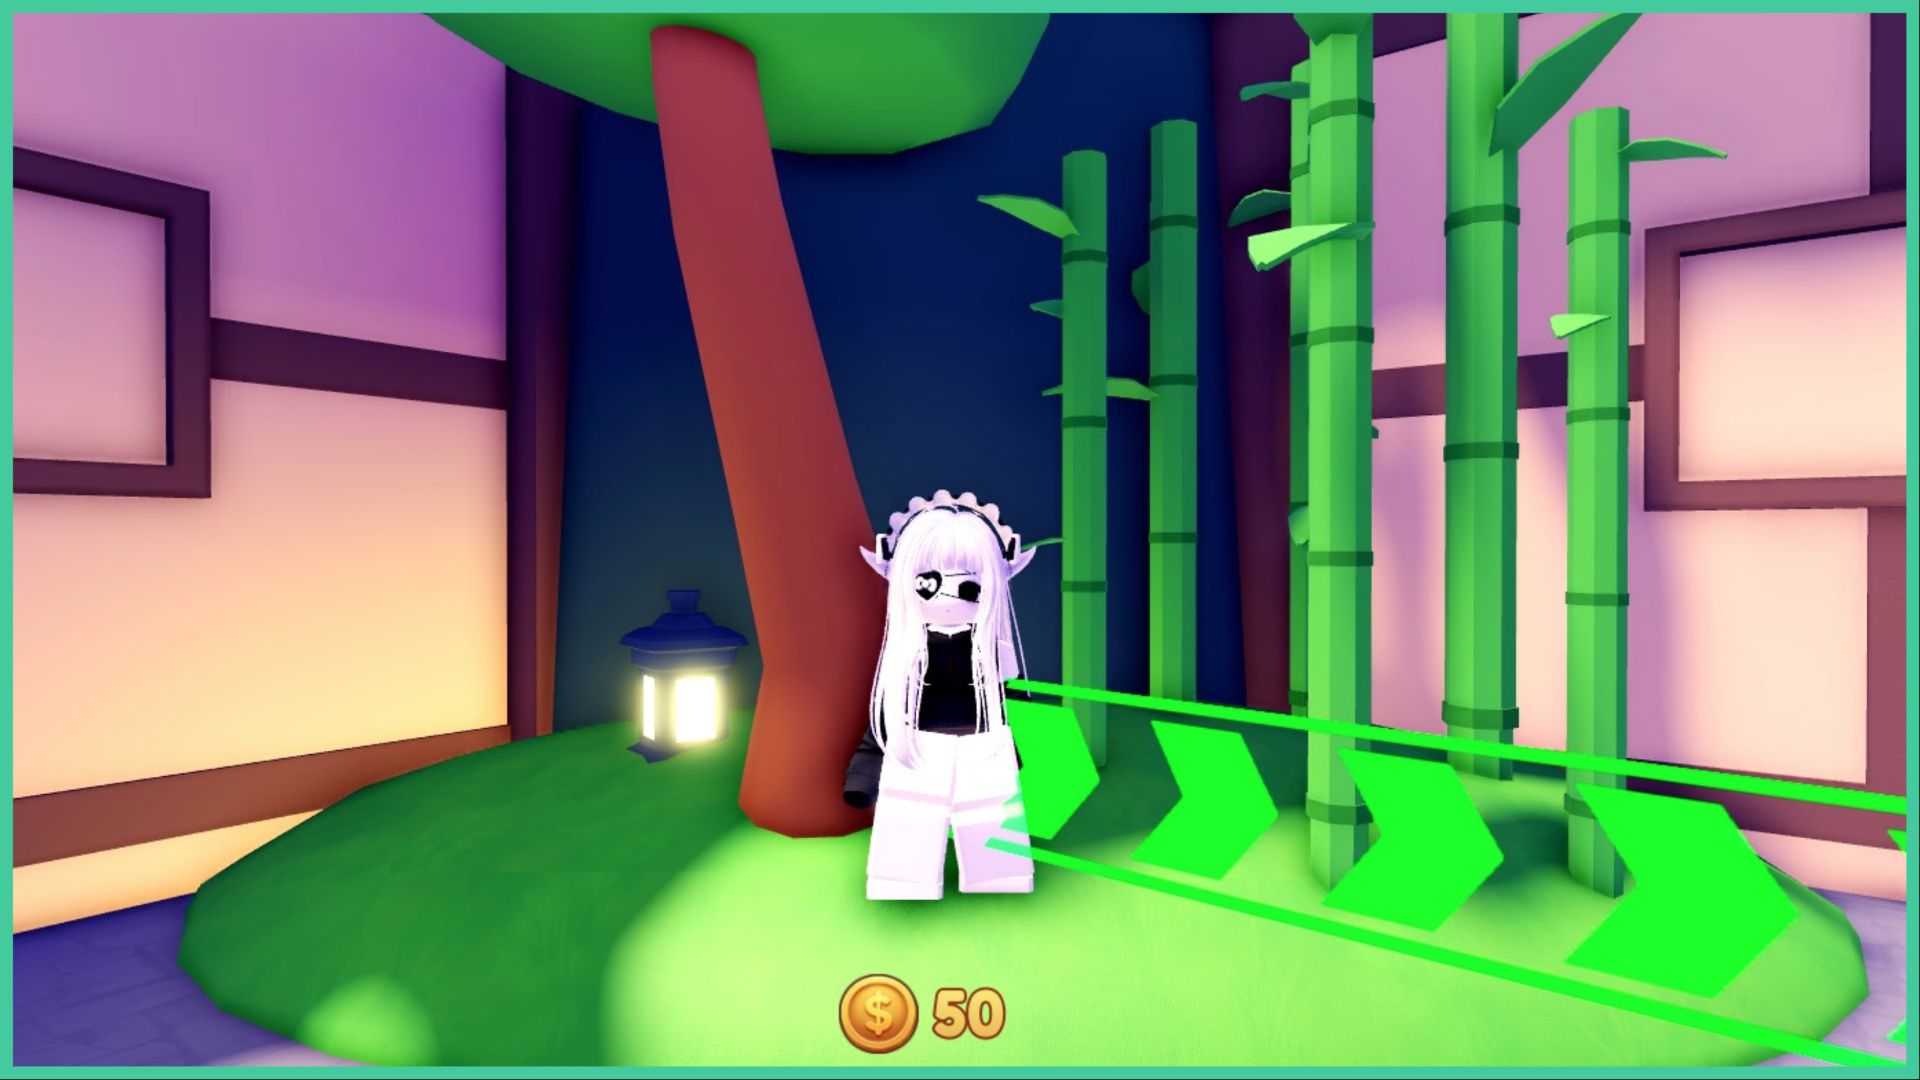 feature image for our blade tower defense codes guide, the image features a screenshot from the game of a roblox player standing on a small hill of grass next to some bamboo and a tree, there is a glowing lantern to the left of the tree. there are green arrows pointing to the right from the roblox player and a a coin symbol below to show how many coins they have, which is 50